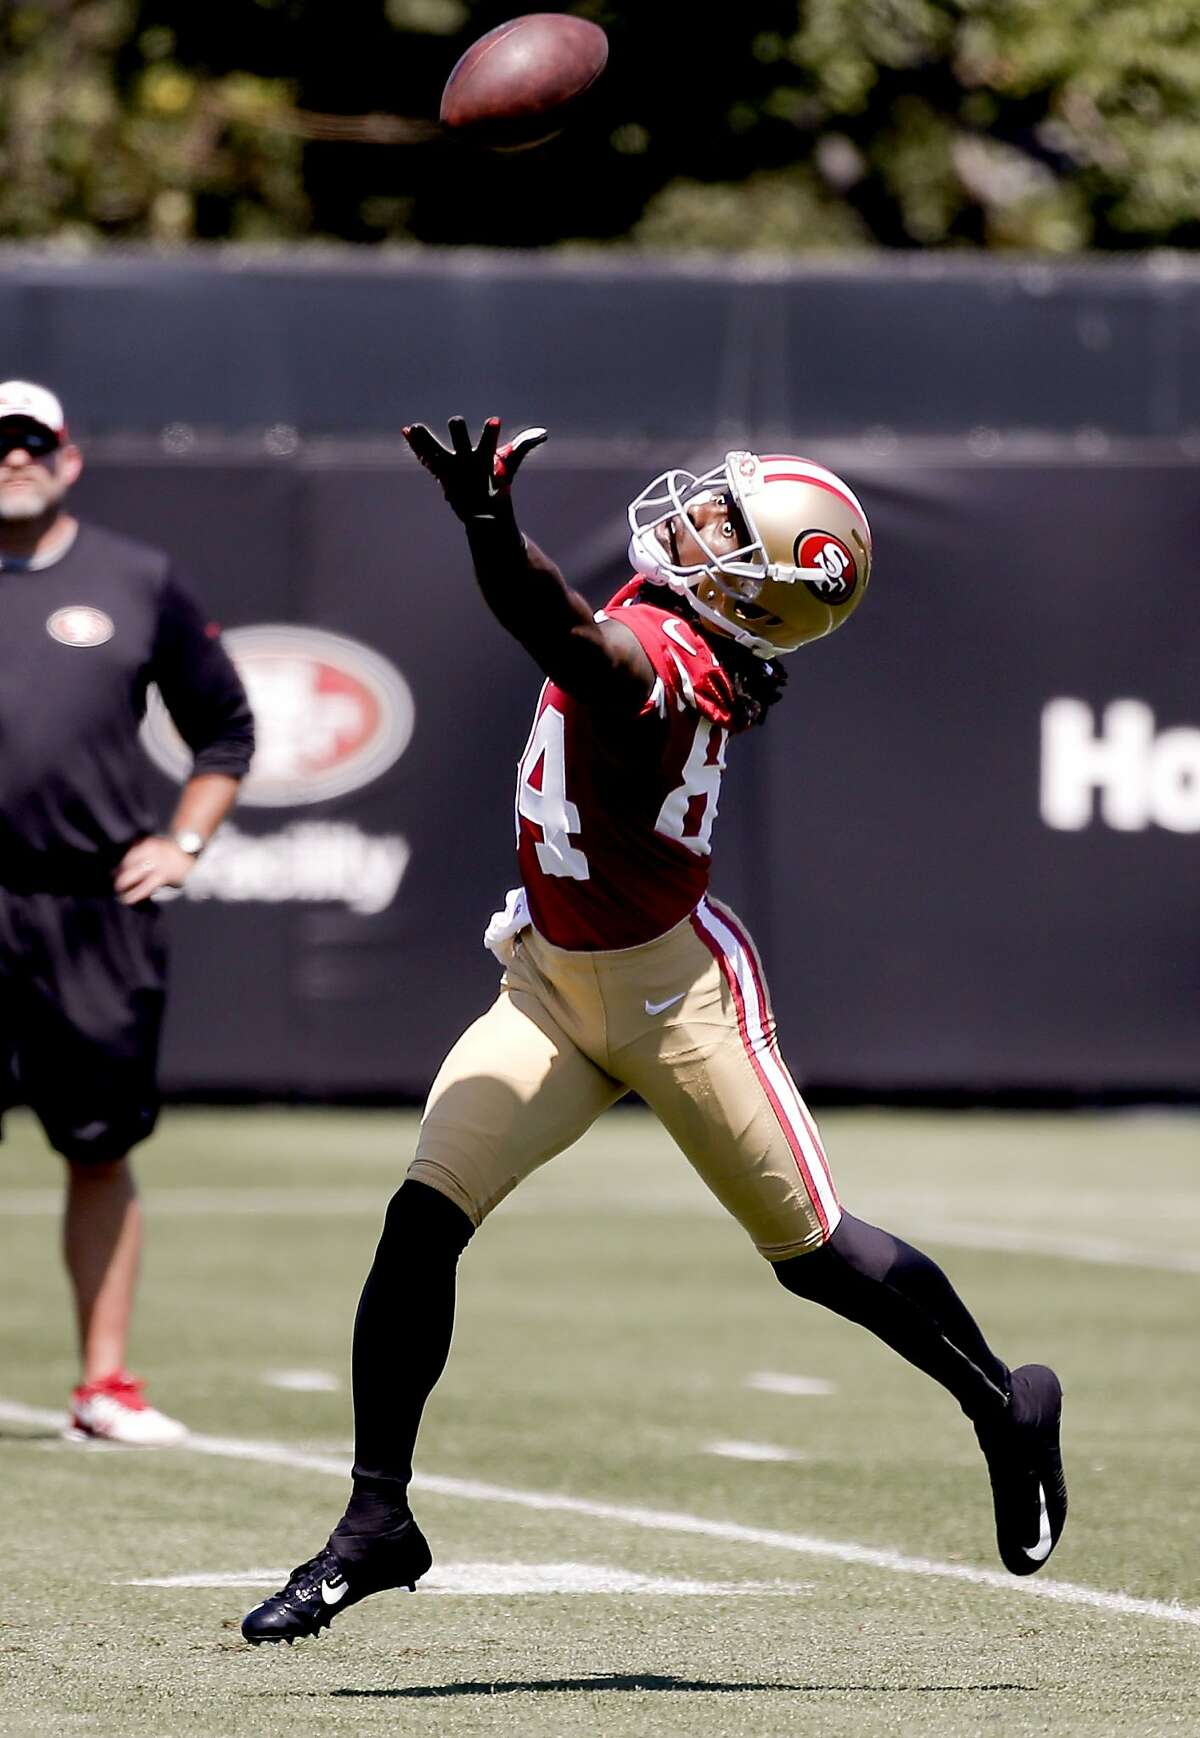 Receiver Brandon Lloyd, (84) reaches out for a pass during drills, as the San Francisco 49ers hold training camp to prepare for the 2014 season in Santa Clara, Calif., on Thursday July 24, 2014.